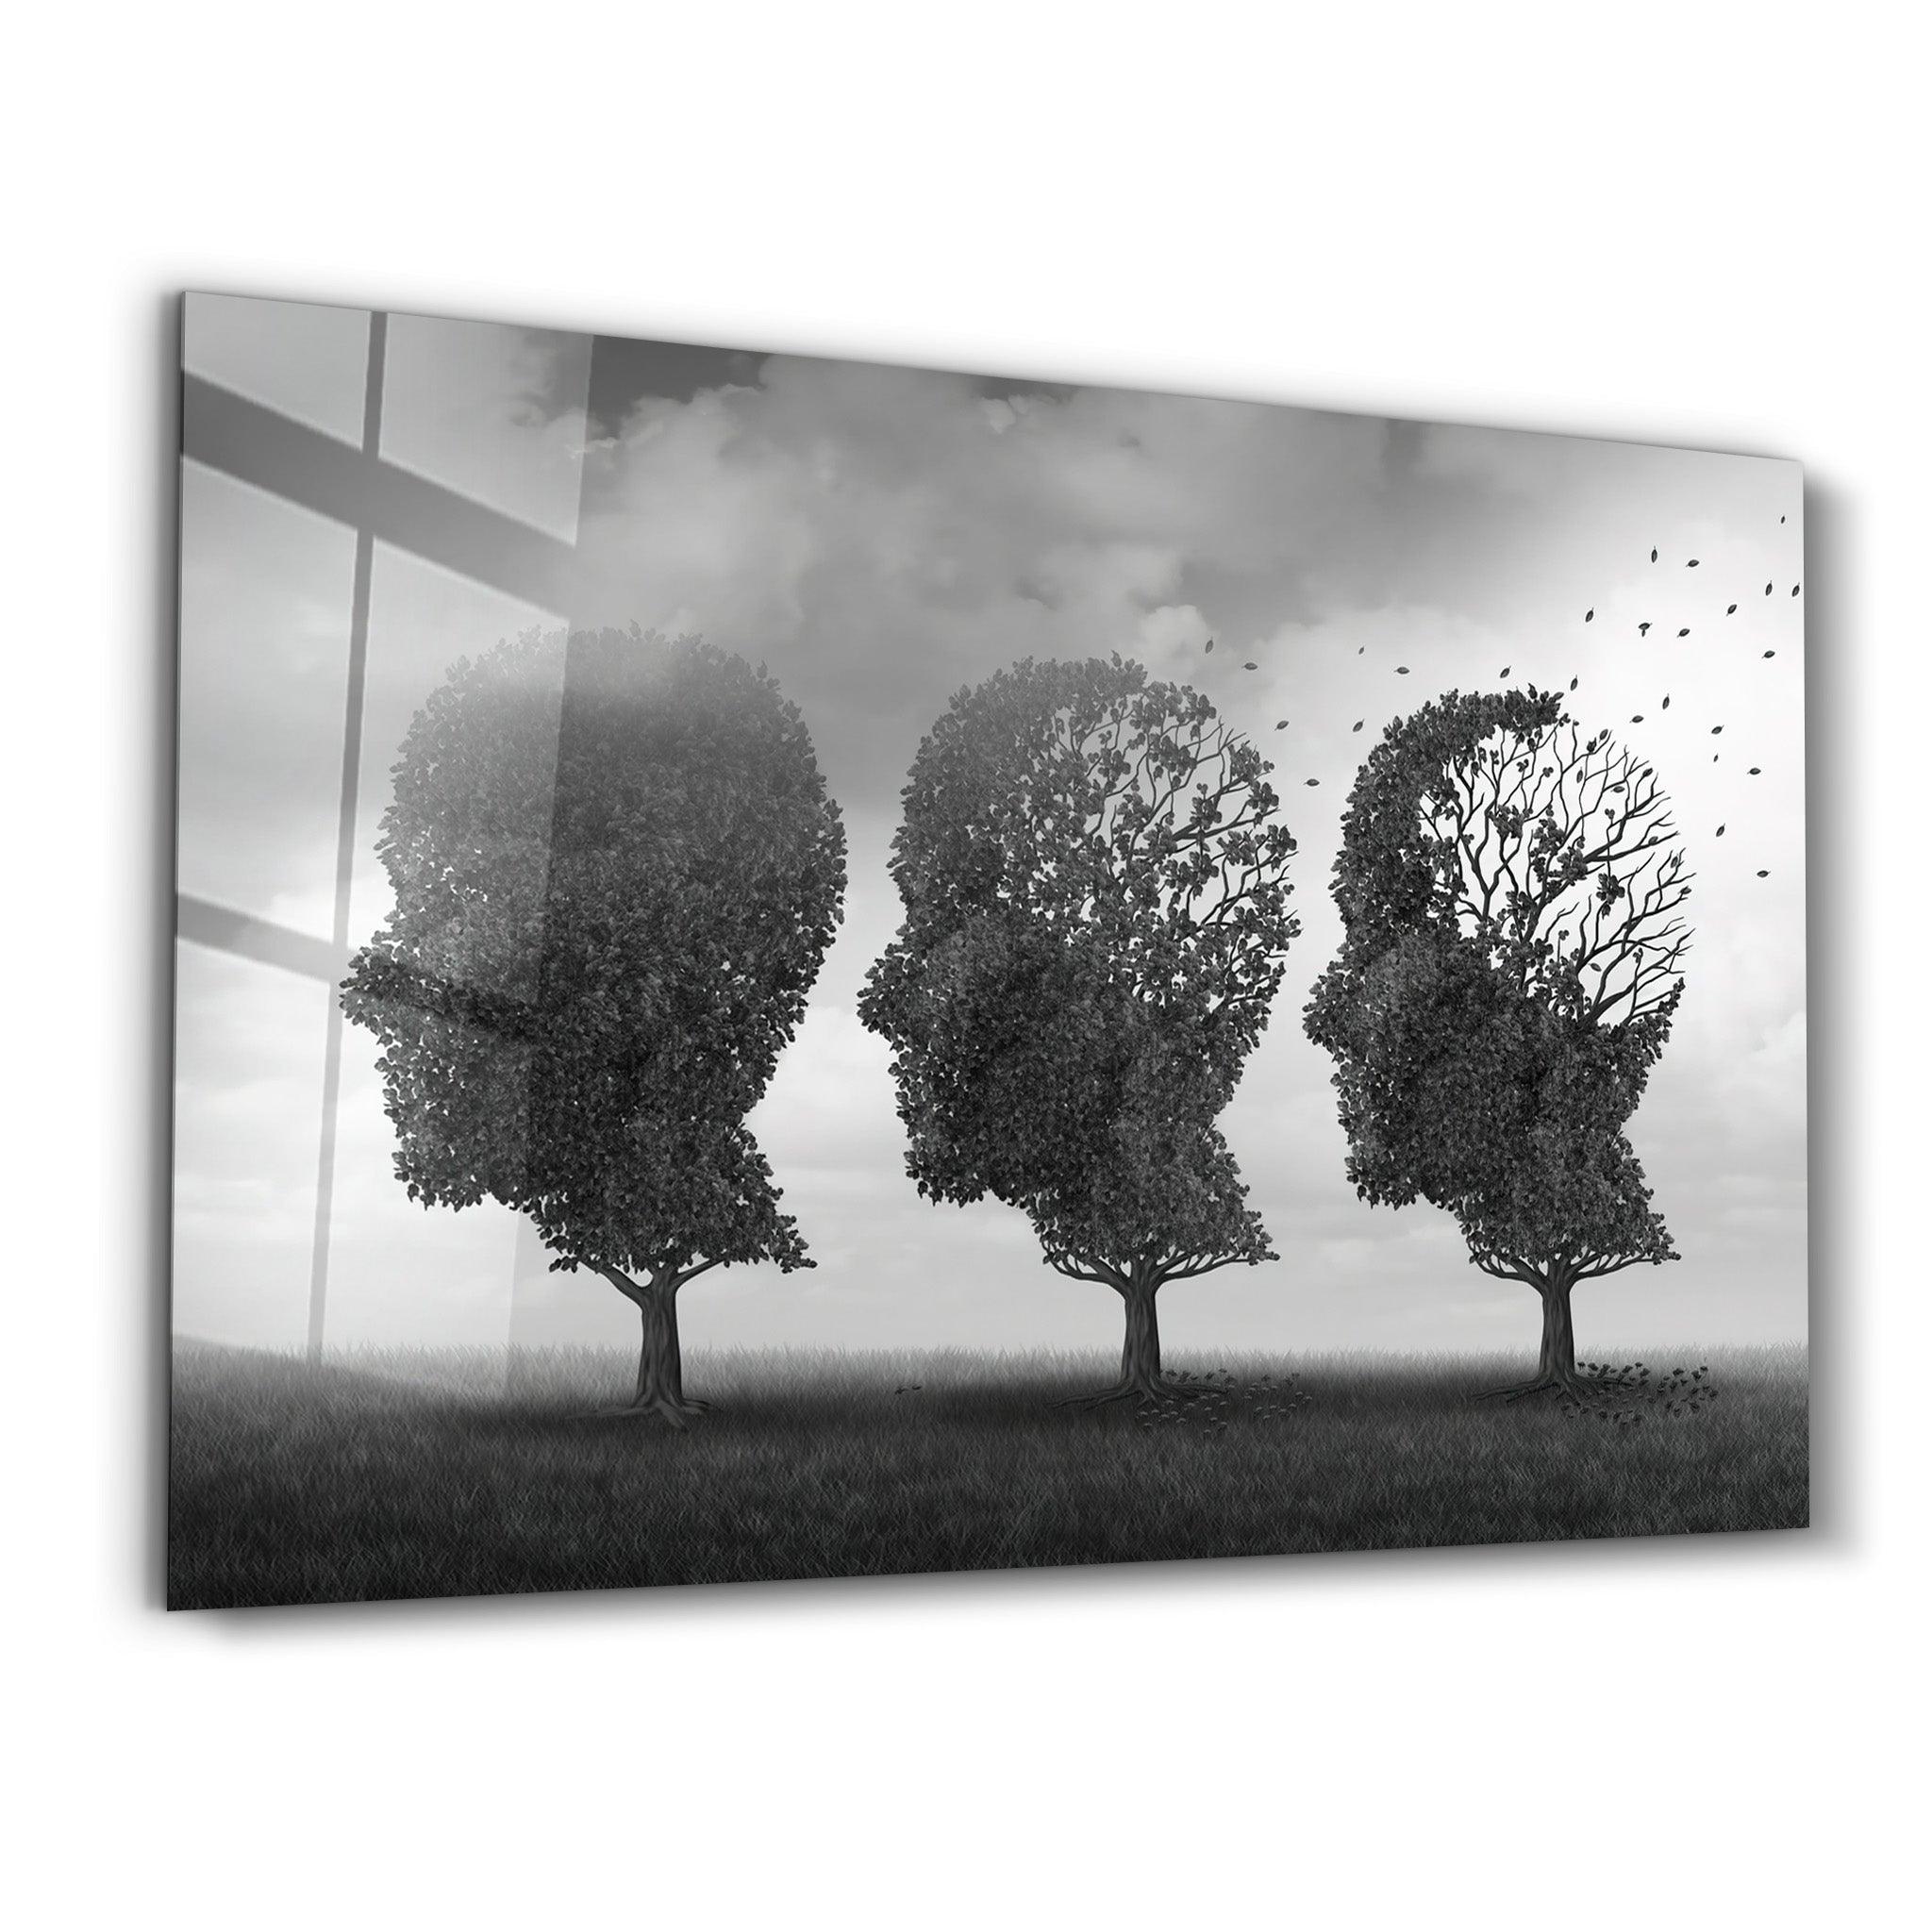 A Phase Of Forgetting Things | Glass Wall Art - ArtDesigna Glass Printing Wall Art